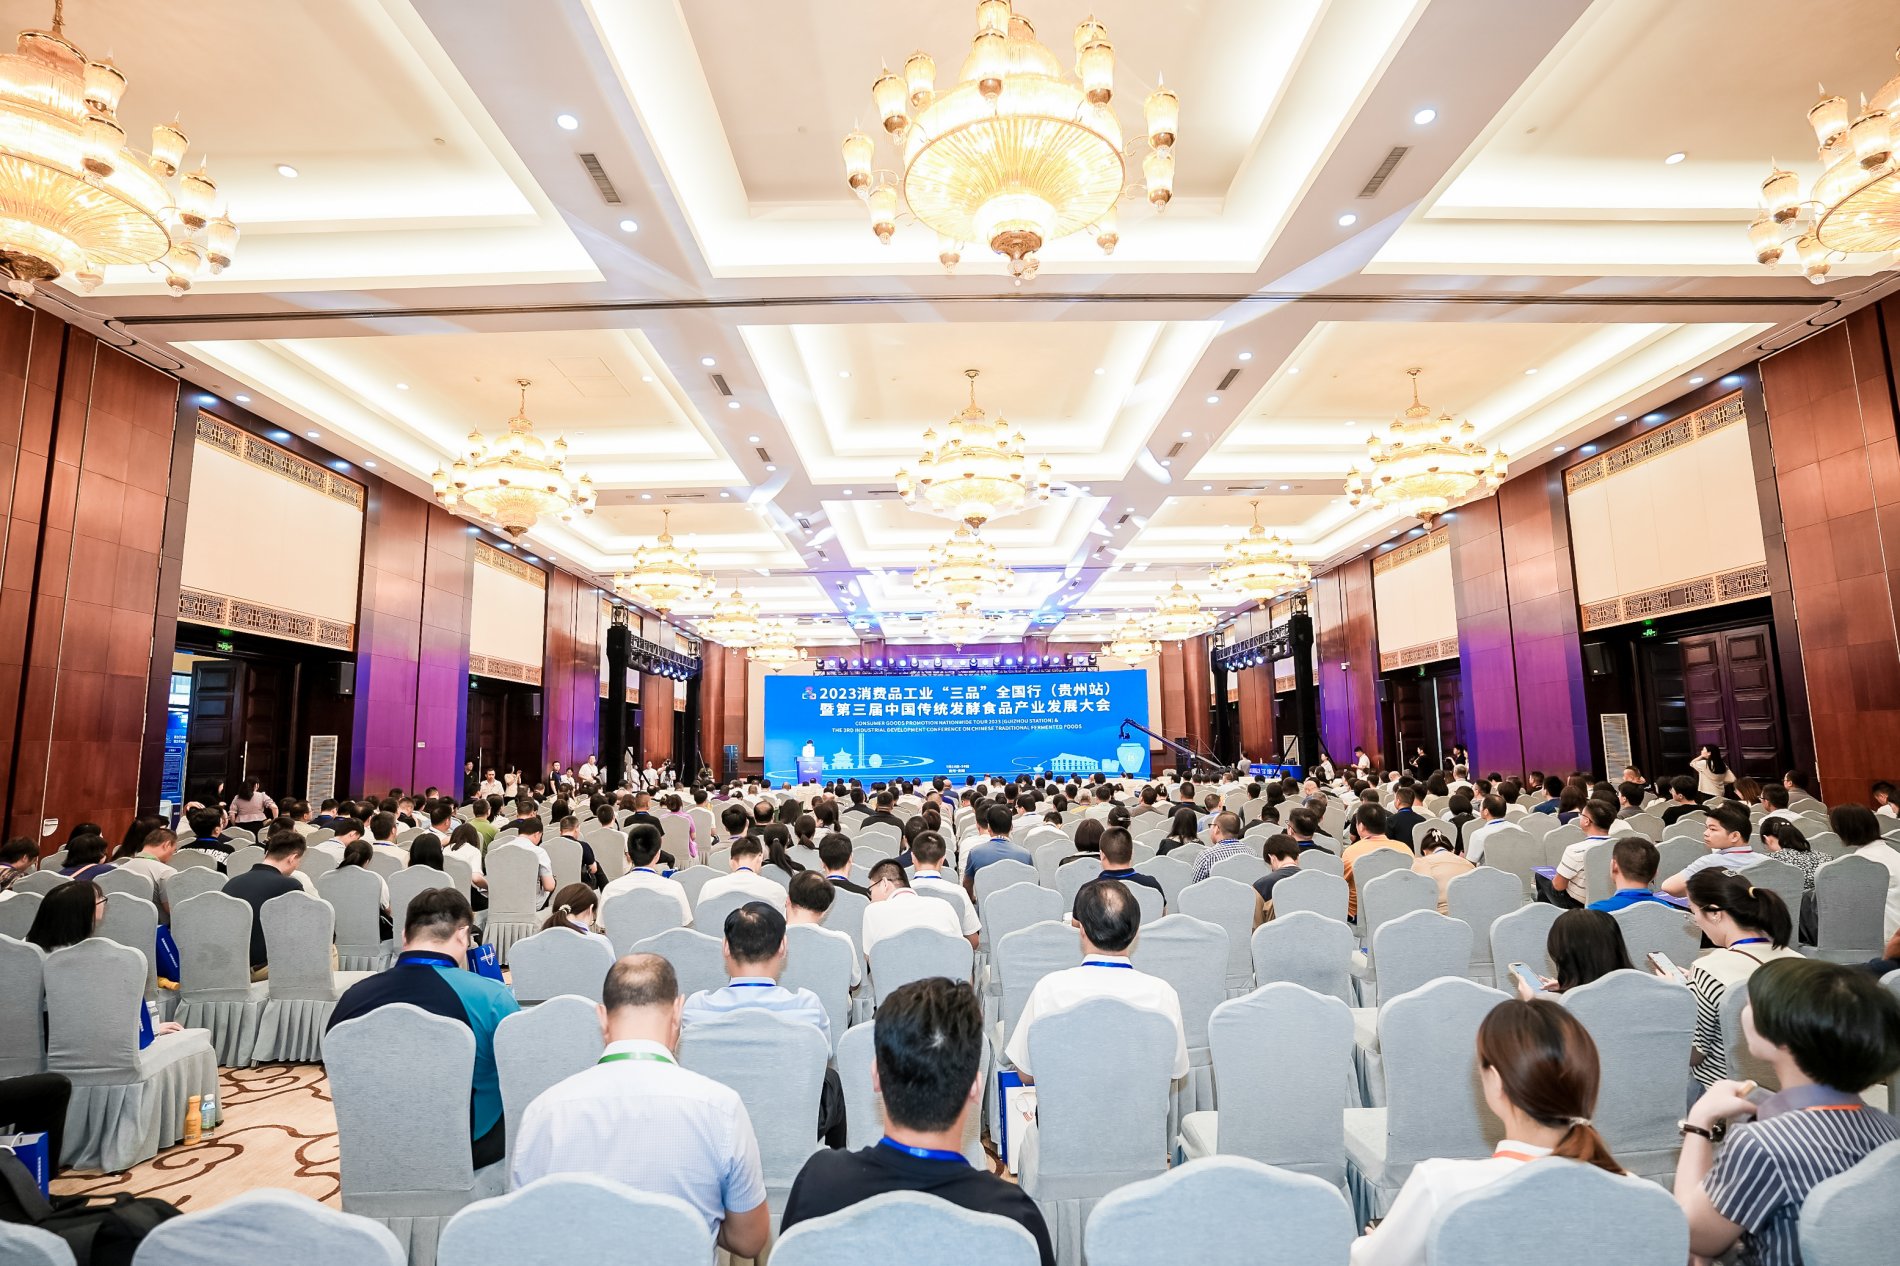 The 2nd Development Conference of Traditional Fermented Food Industry in 2021